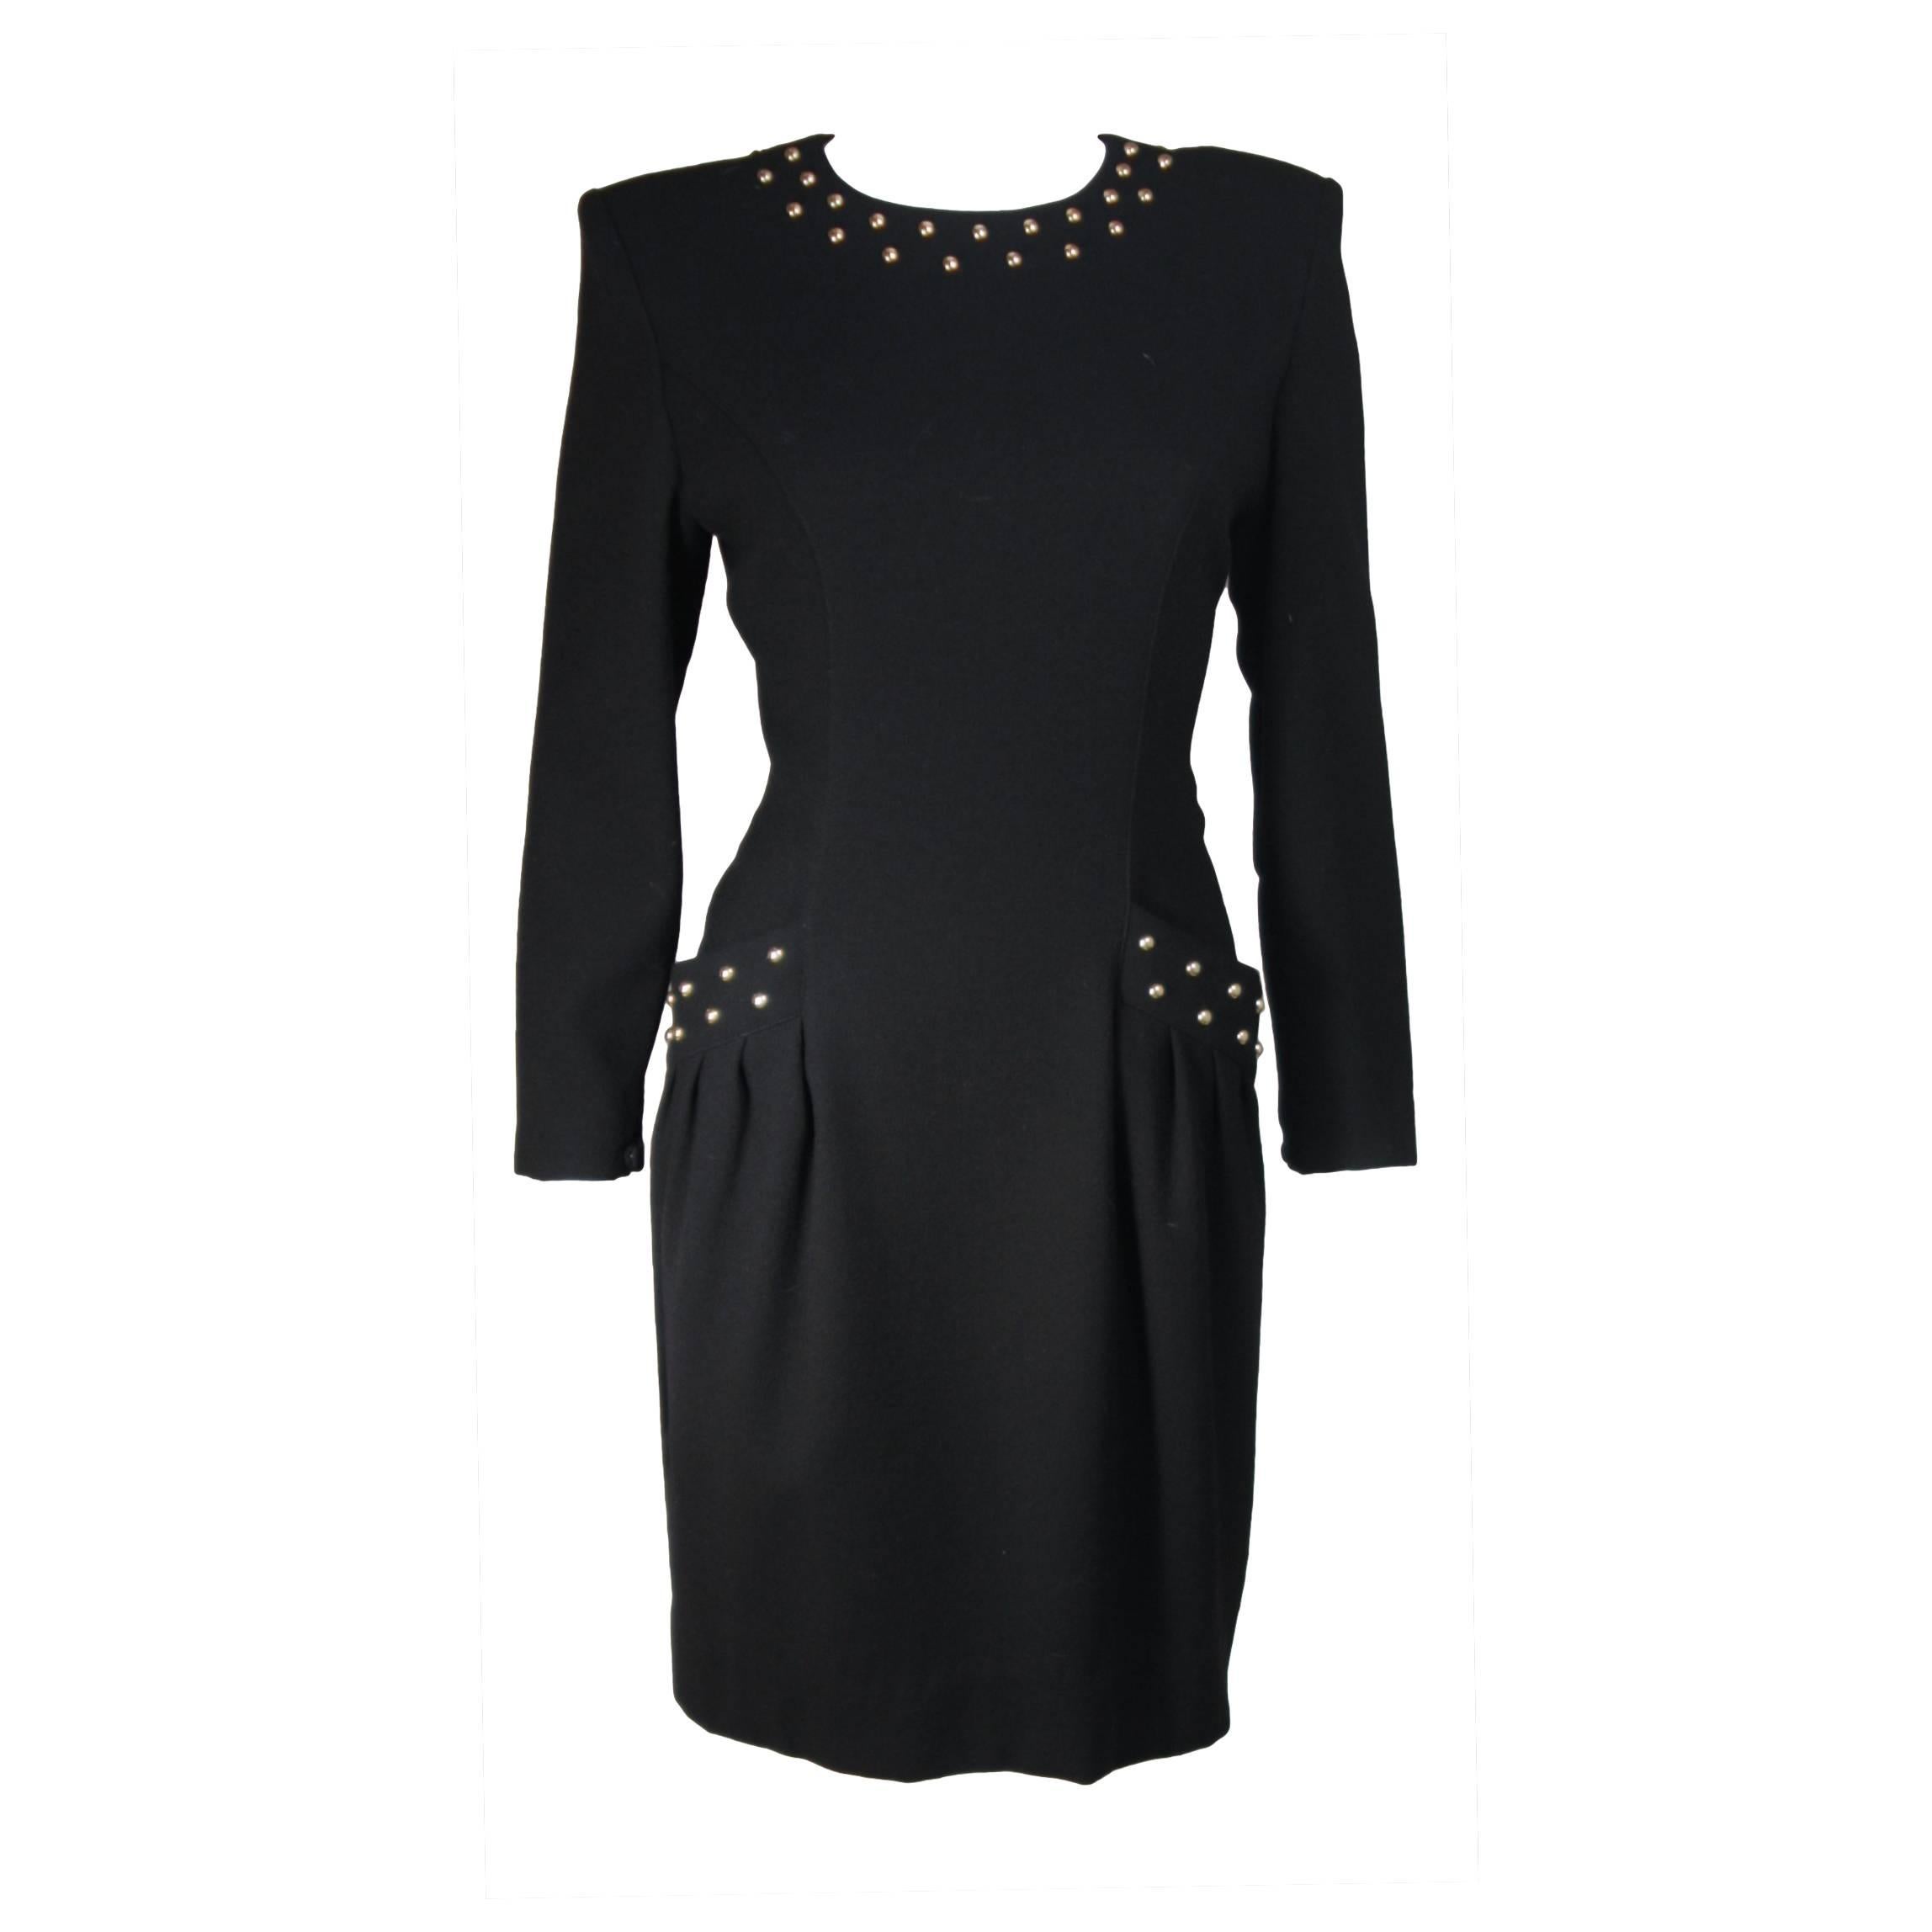 GUY LAROCHE Black Cocktail Dress with Stud Applique Size Large For Sale